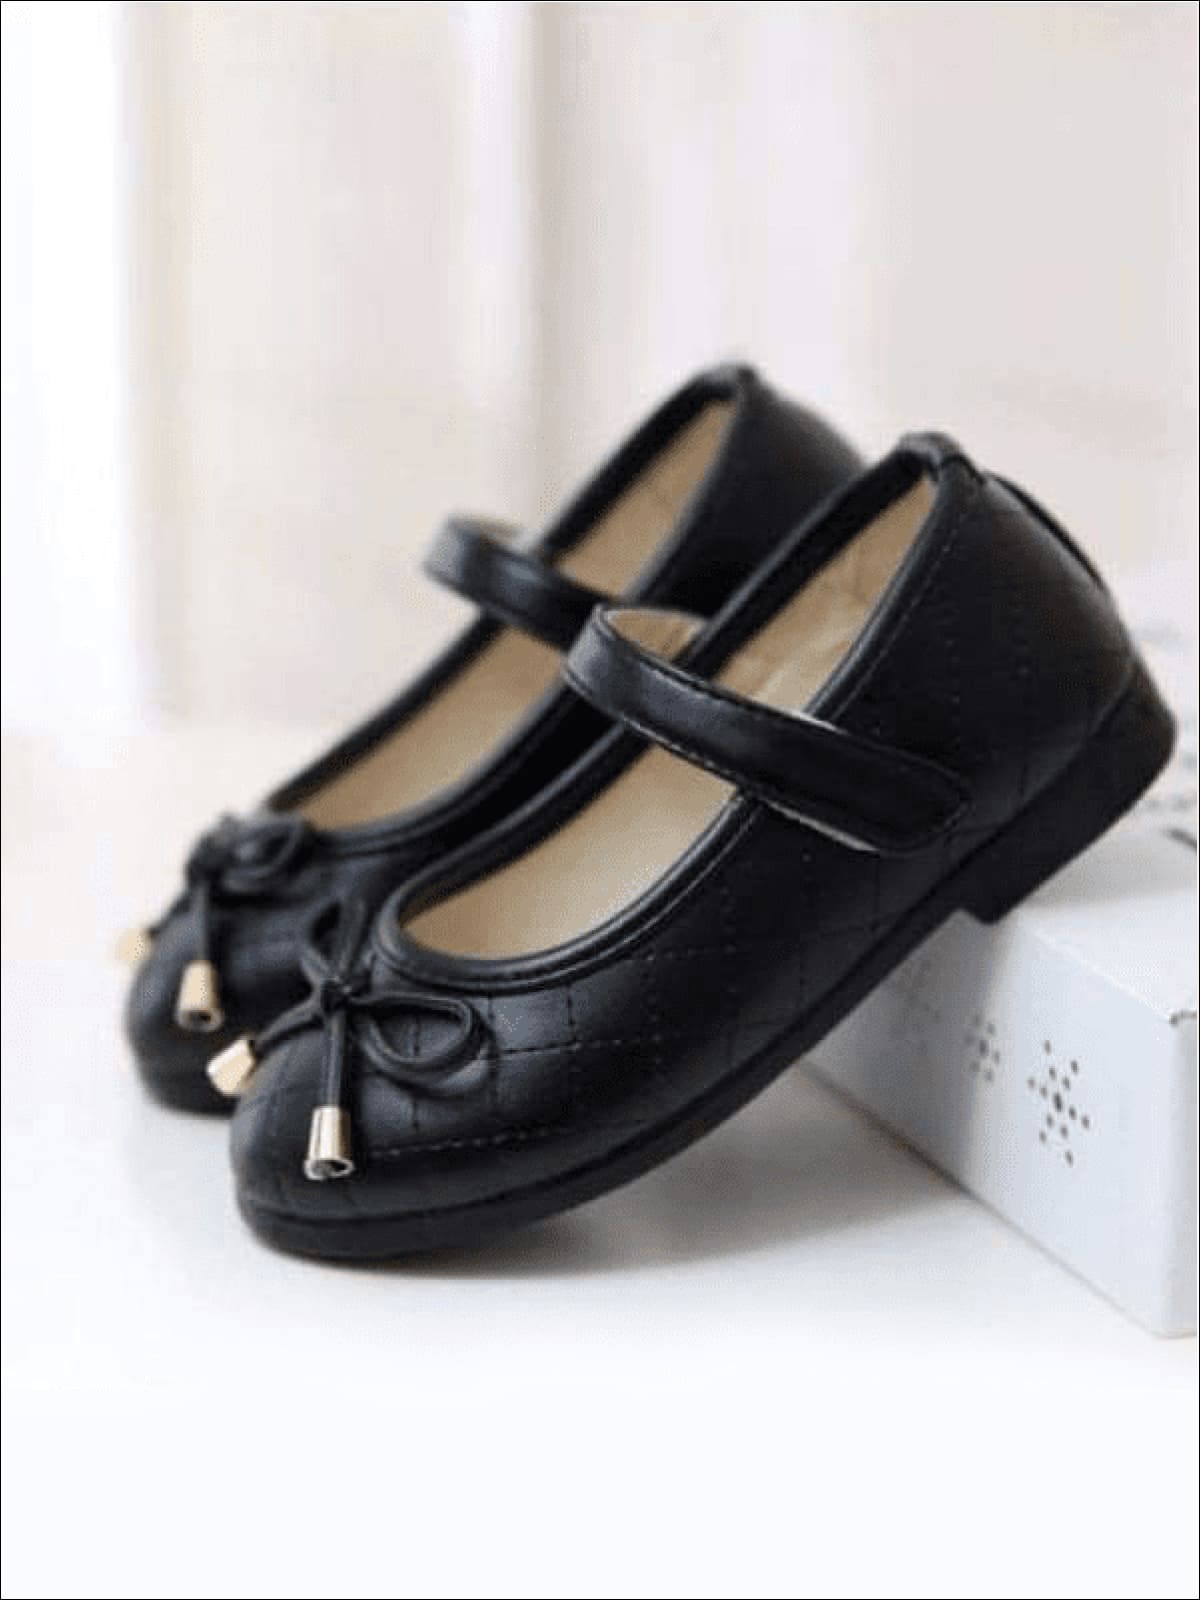 Kids Shoes By Liv & Mia | Girls Black Bow Slip On Quilted Flats Shoes